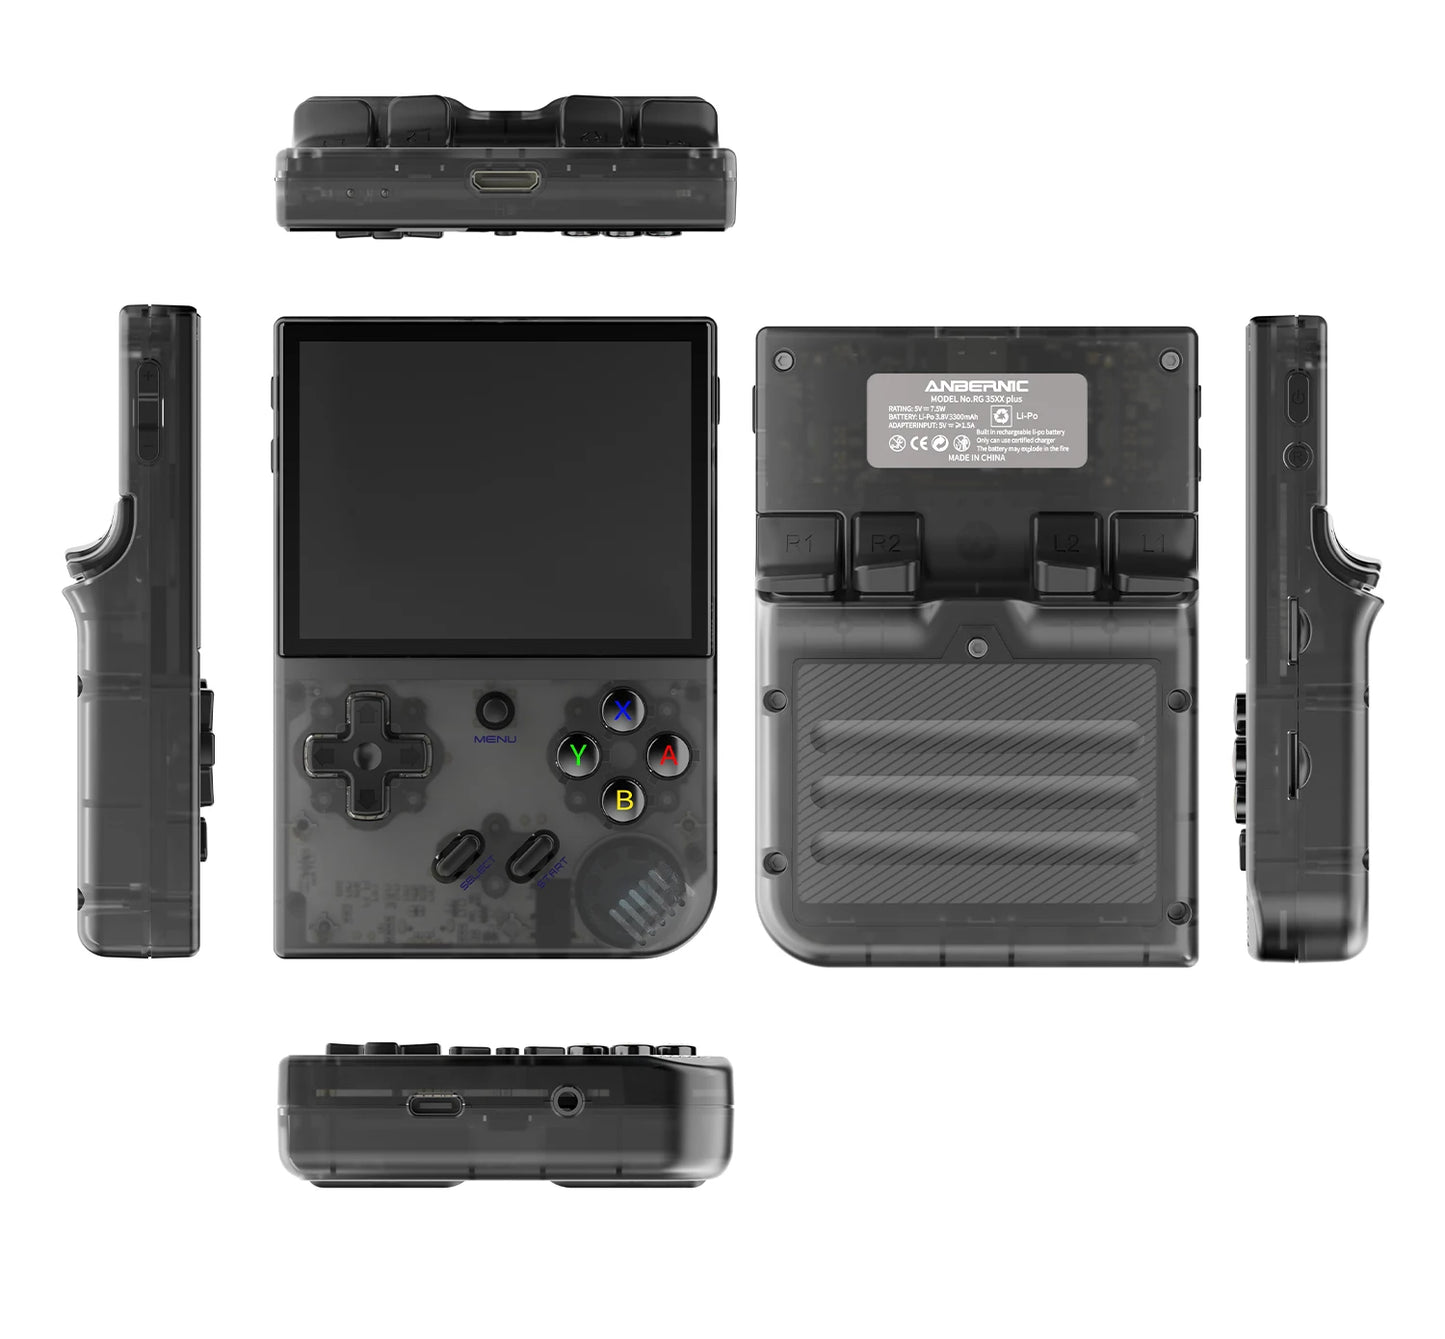 Anbernic RG35XX PLUS Handheld Game Console 3.5'' IPS Screen + HDMI Output and 5G Wifi Connection